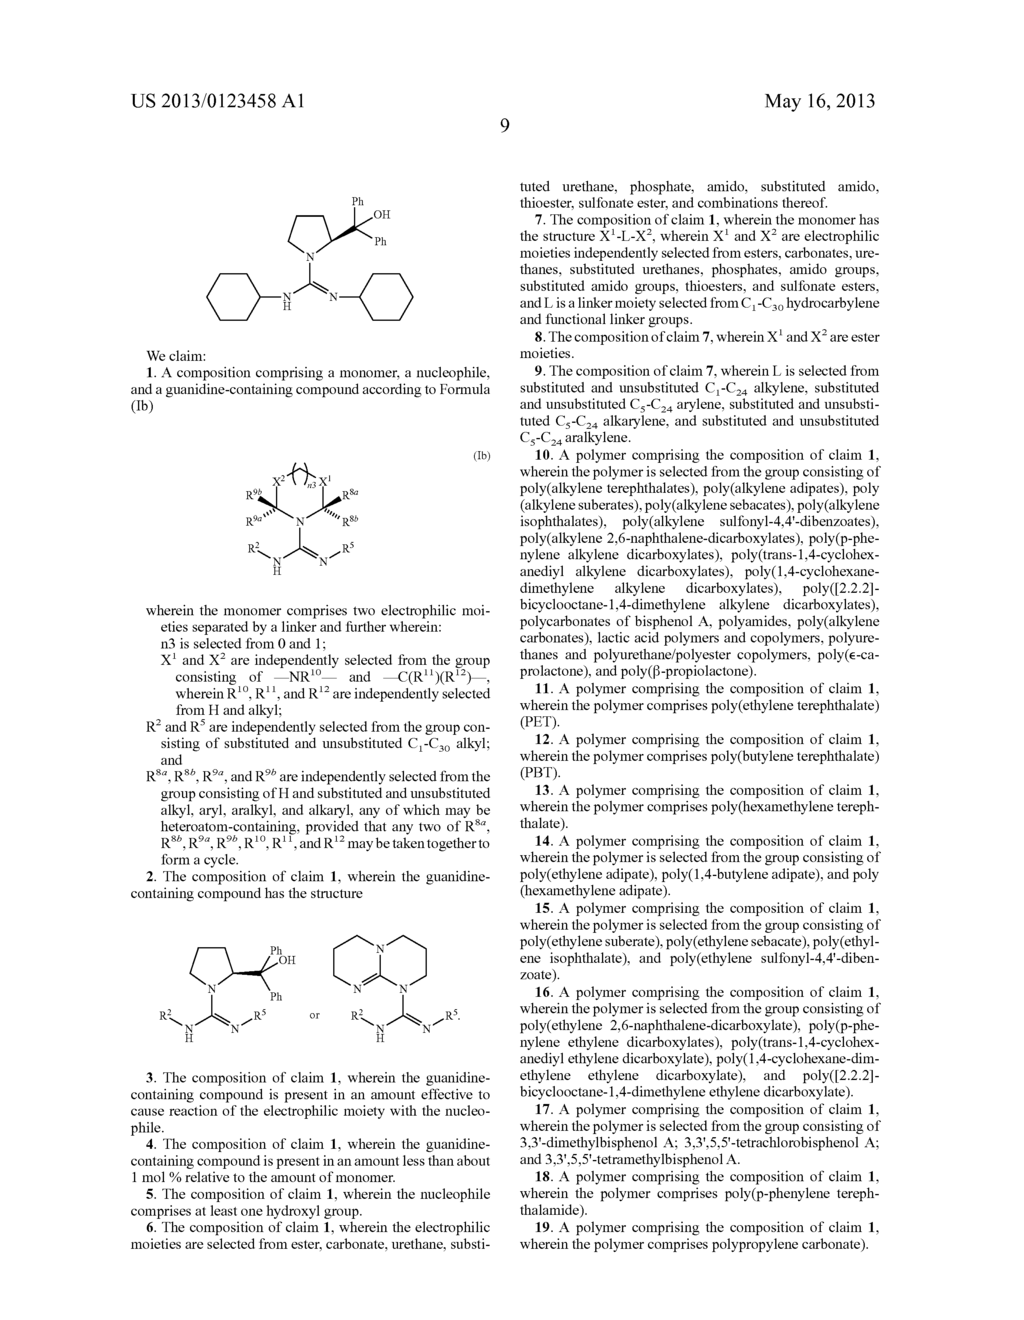 CATALYTIC POLYMERIZATION OF POLYMERS CONTAINING ELECTROPHIIC LINKAGES     USING NUCLEOPHILIC REAGENTS - diagram, schematic, and image 10